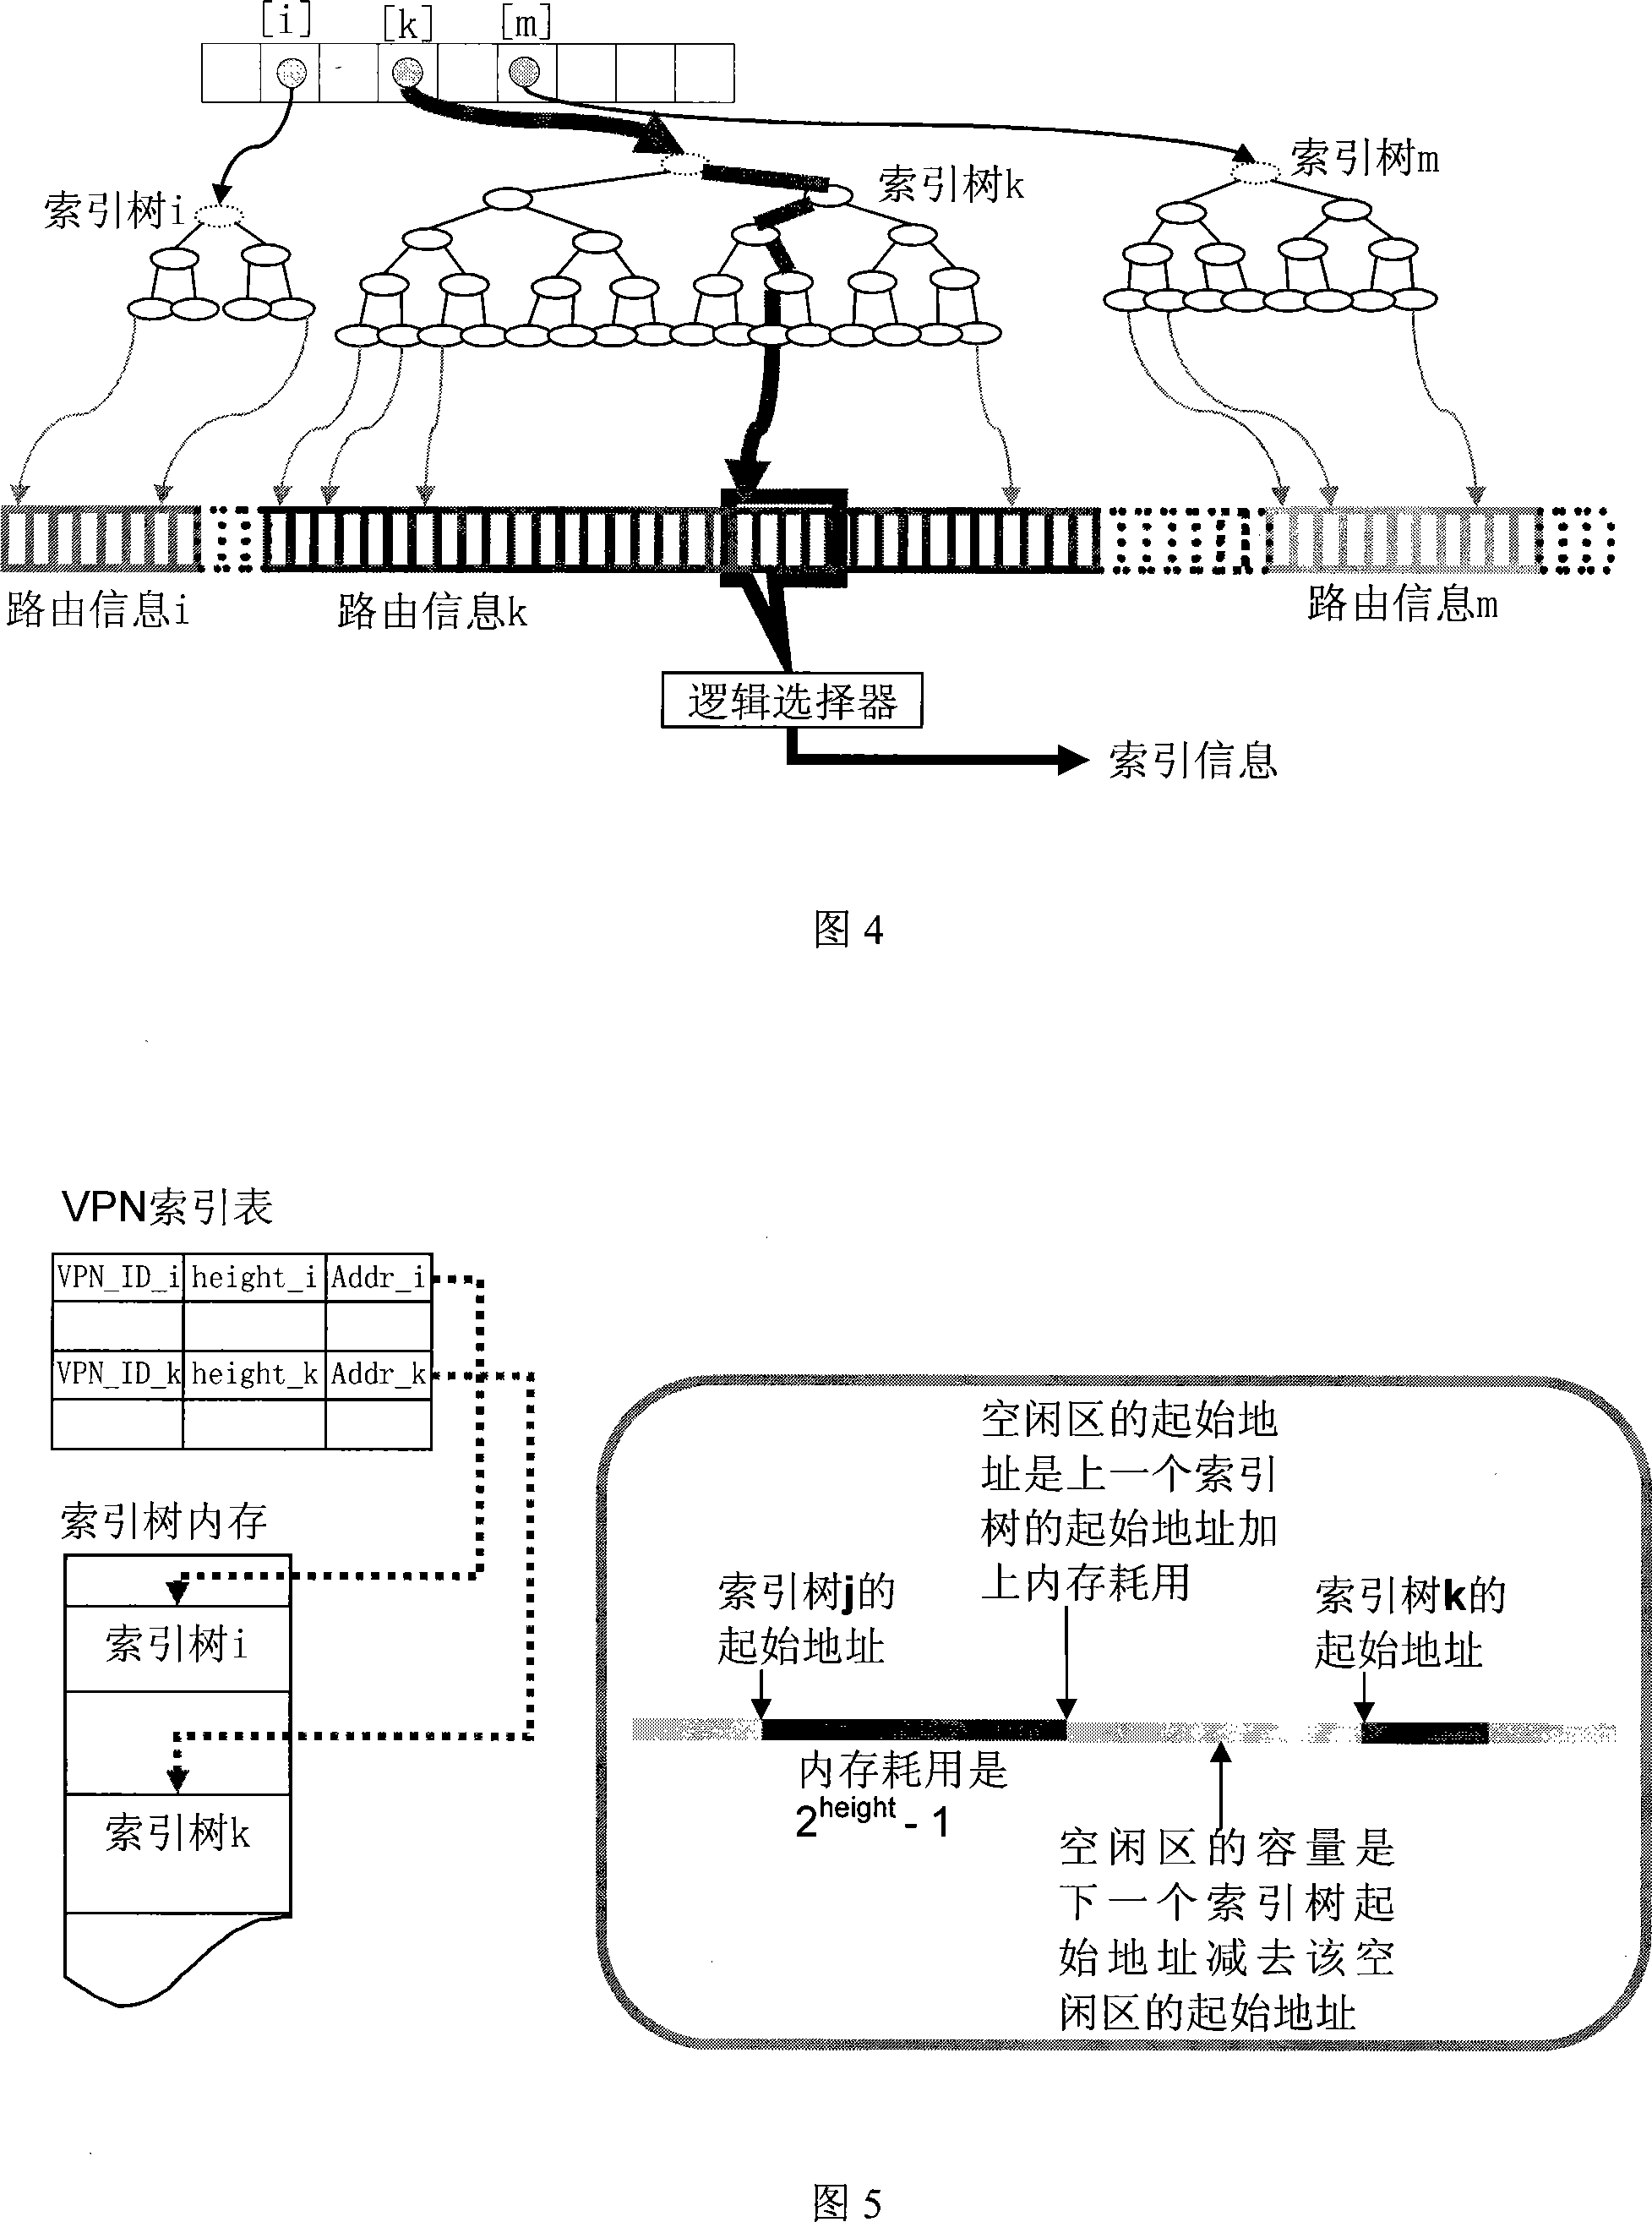 Virtual private network routing search method and device